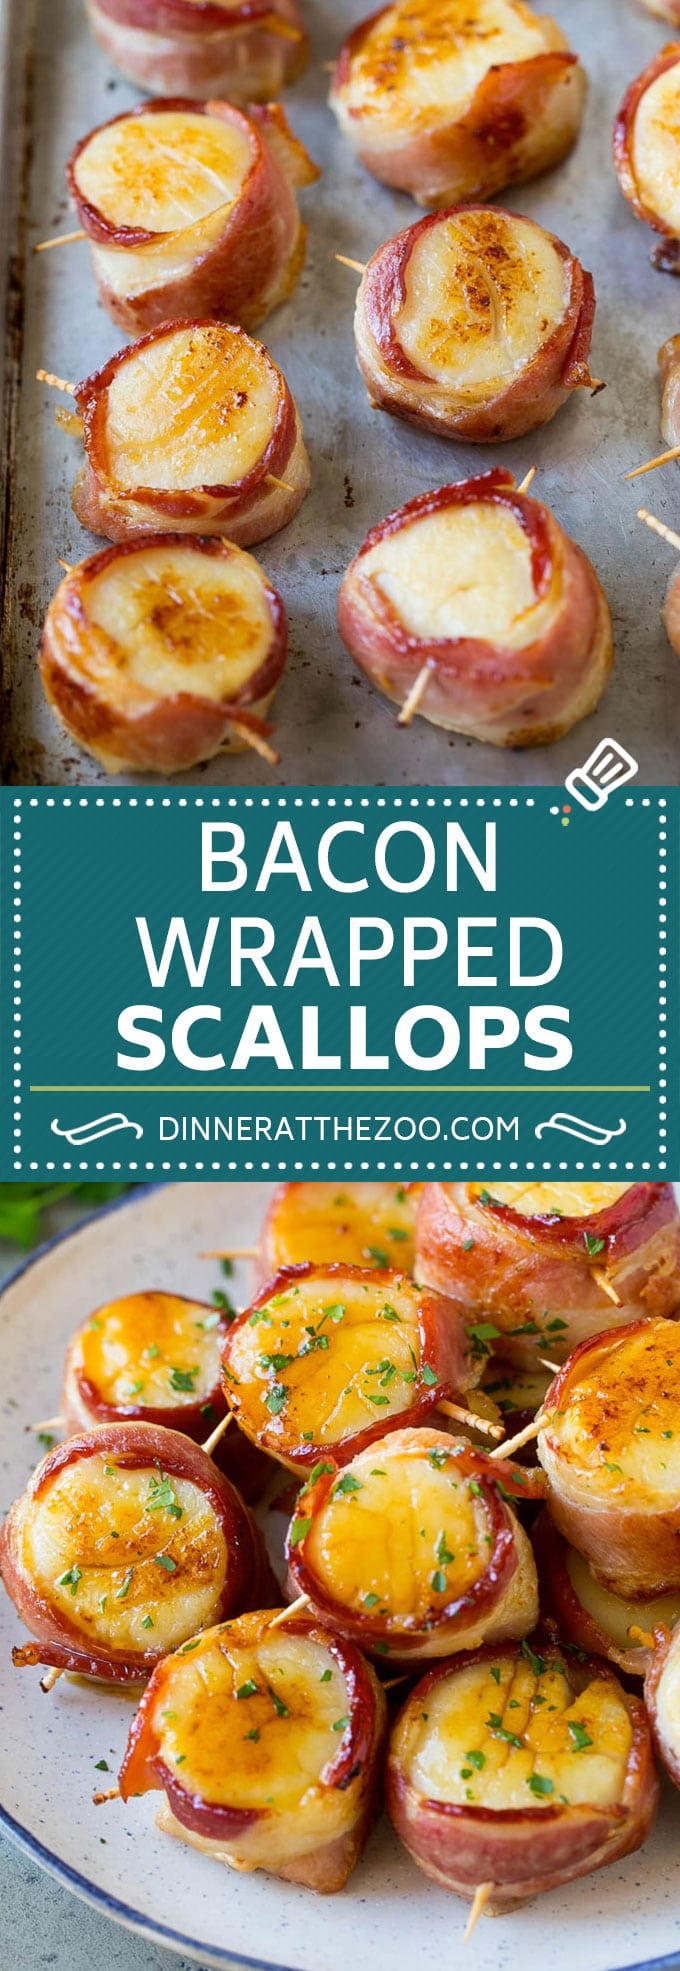 Bacon Wrapped Scallops Recipe | Broiled Scallops | Baked Scallops #scallops #seafood #bacon #dinner #appetizer #dinneratthezoo